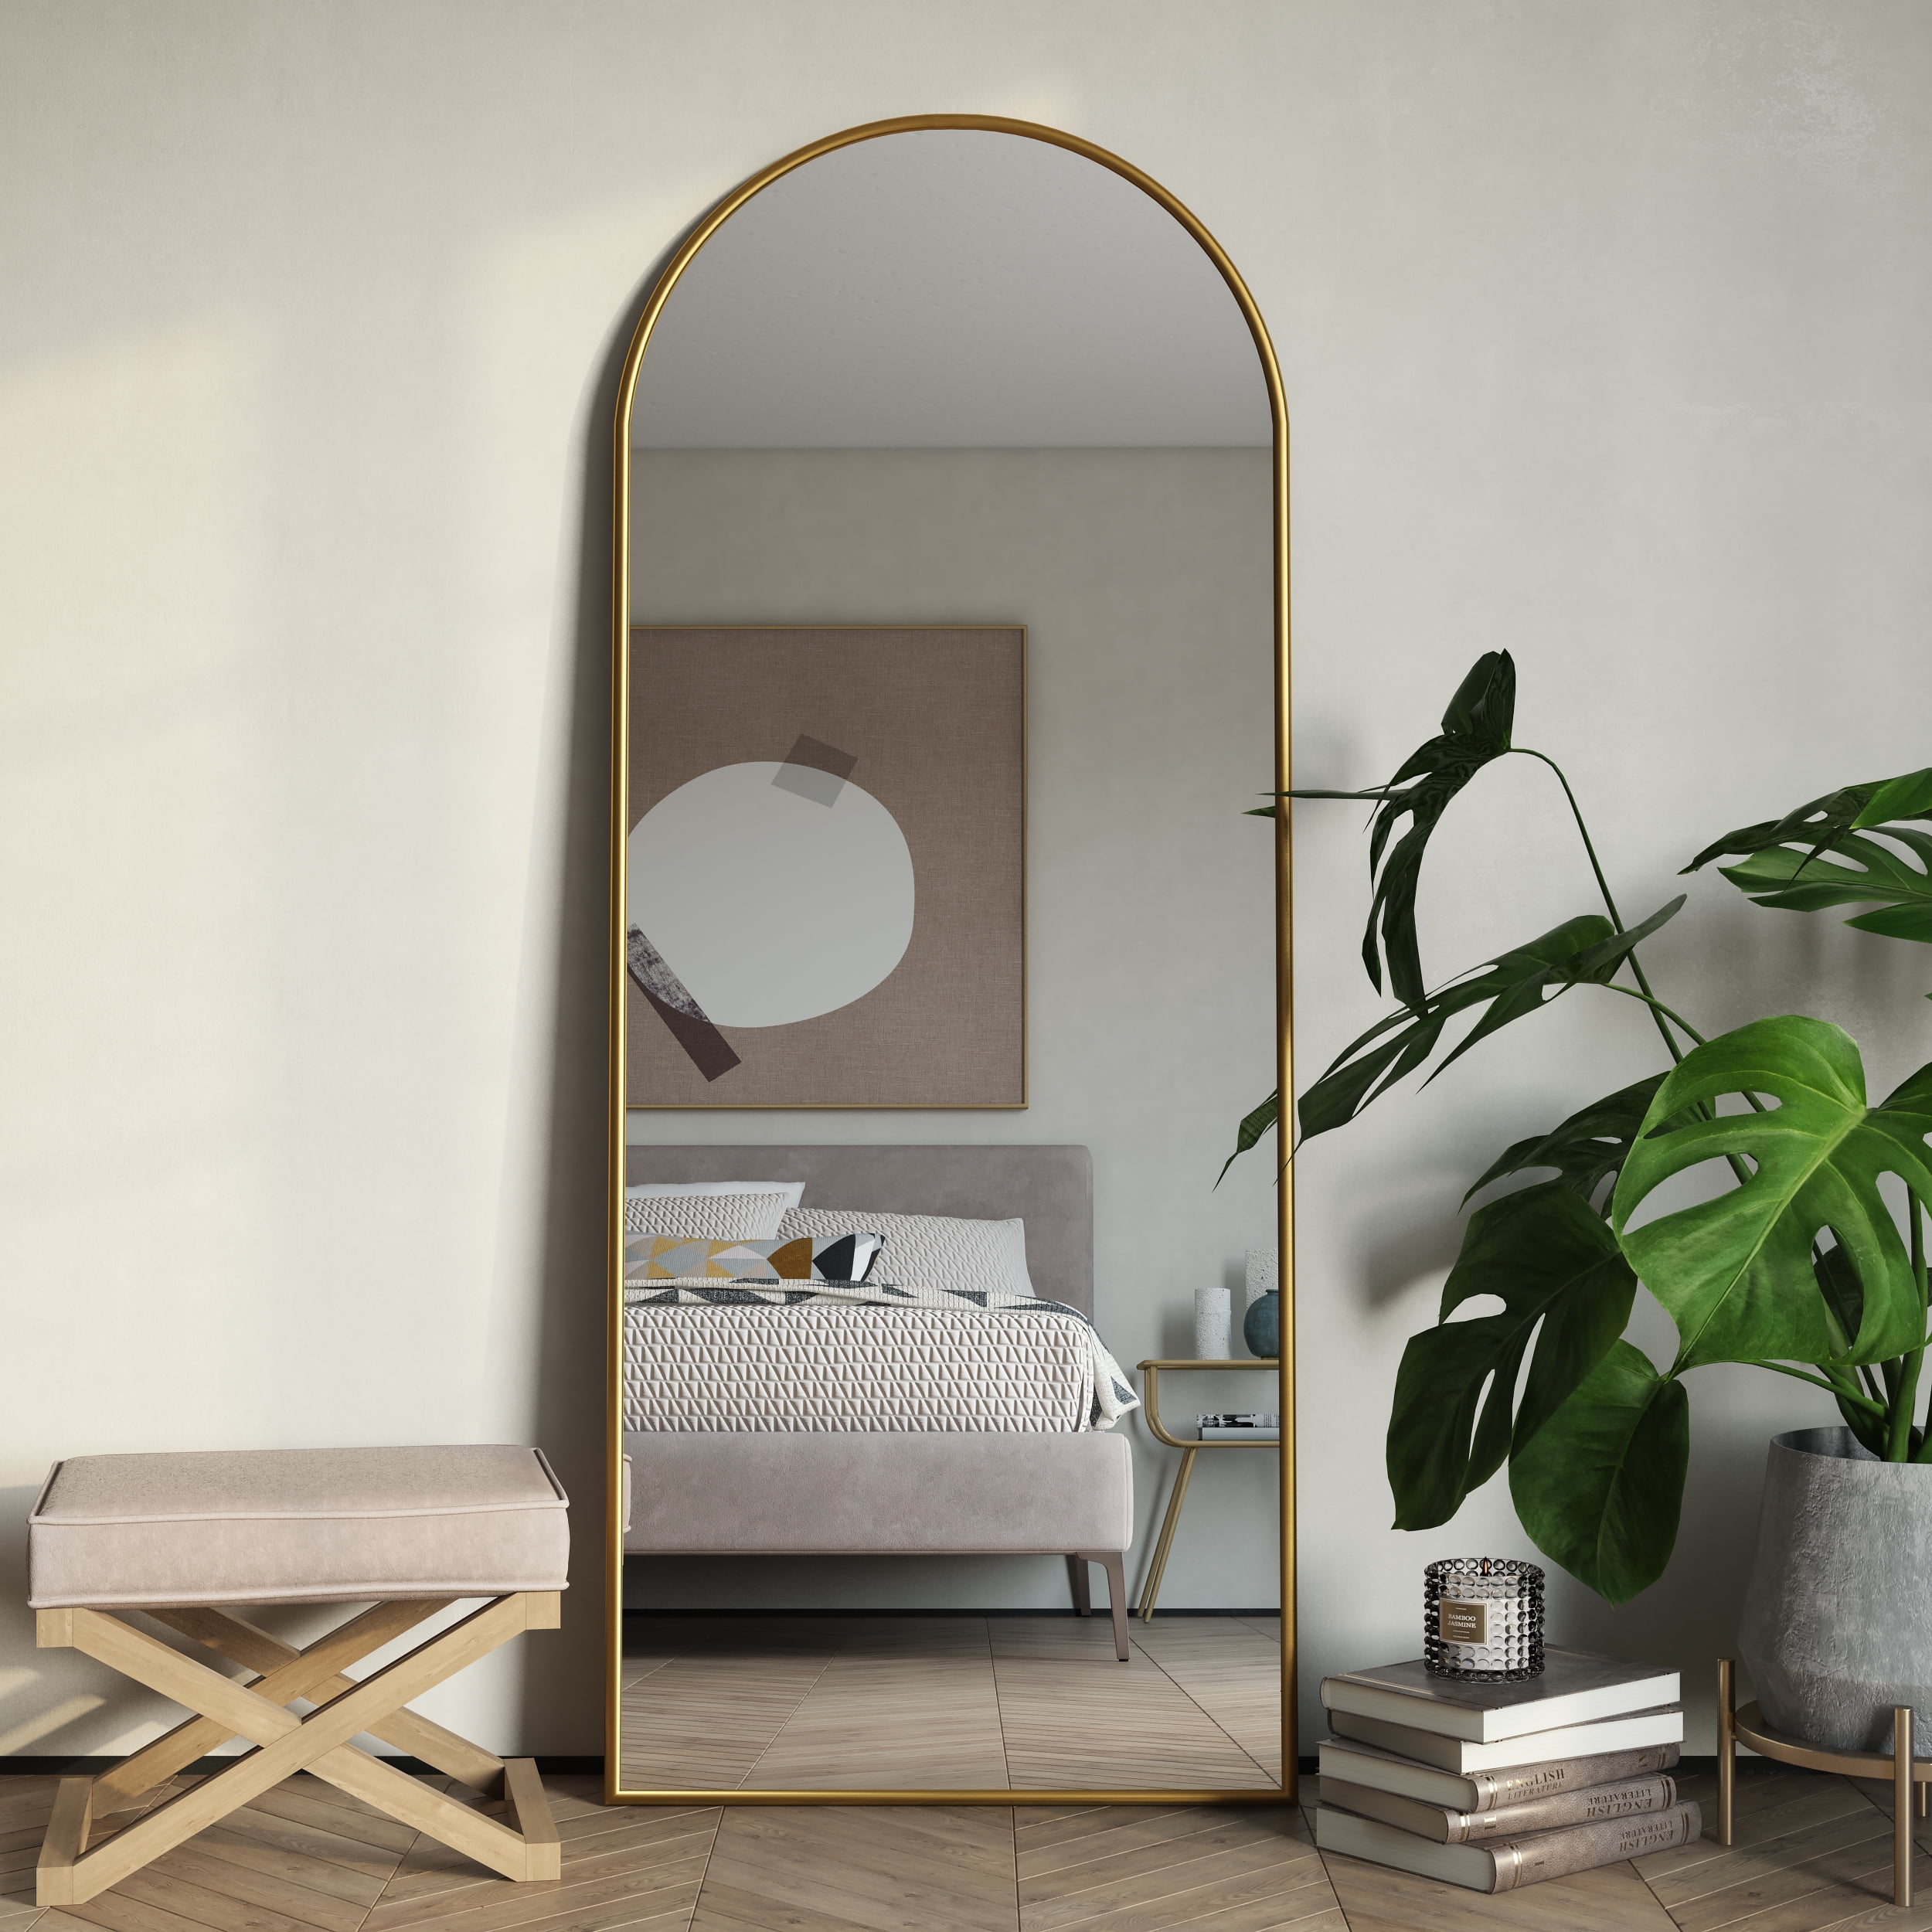 Nadia Modern Arch 70 X28 Floor Mirror, Gold Arched Ornate Full Length Mirror